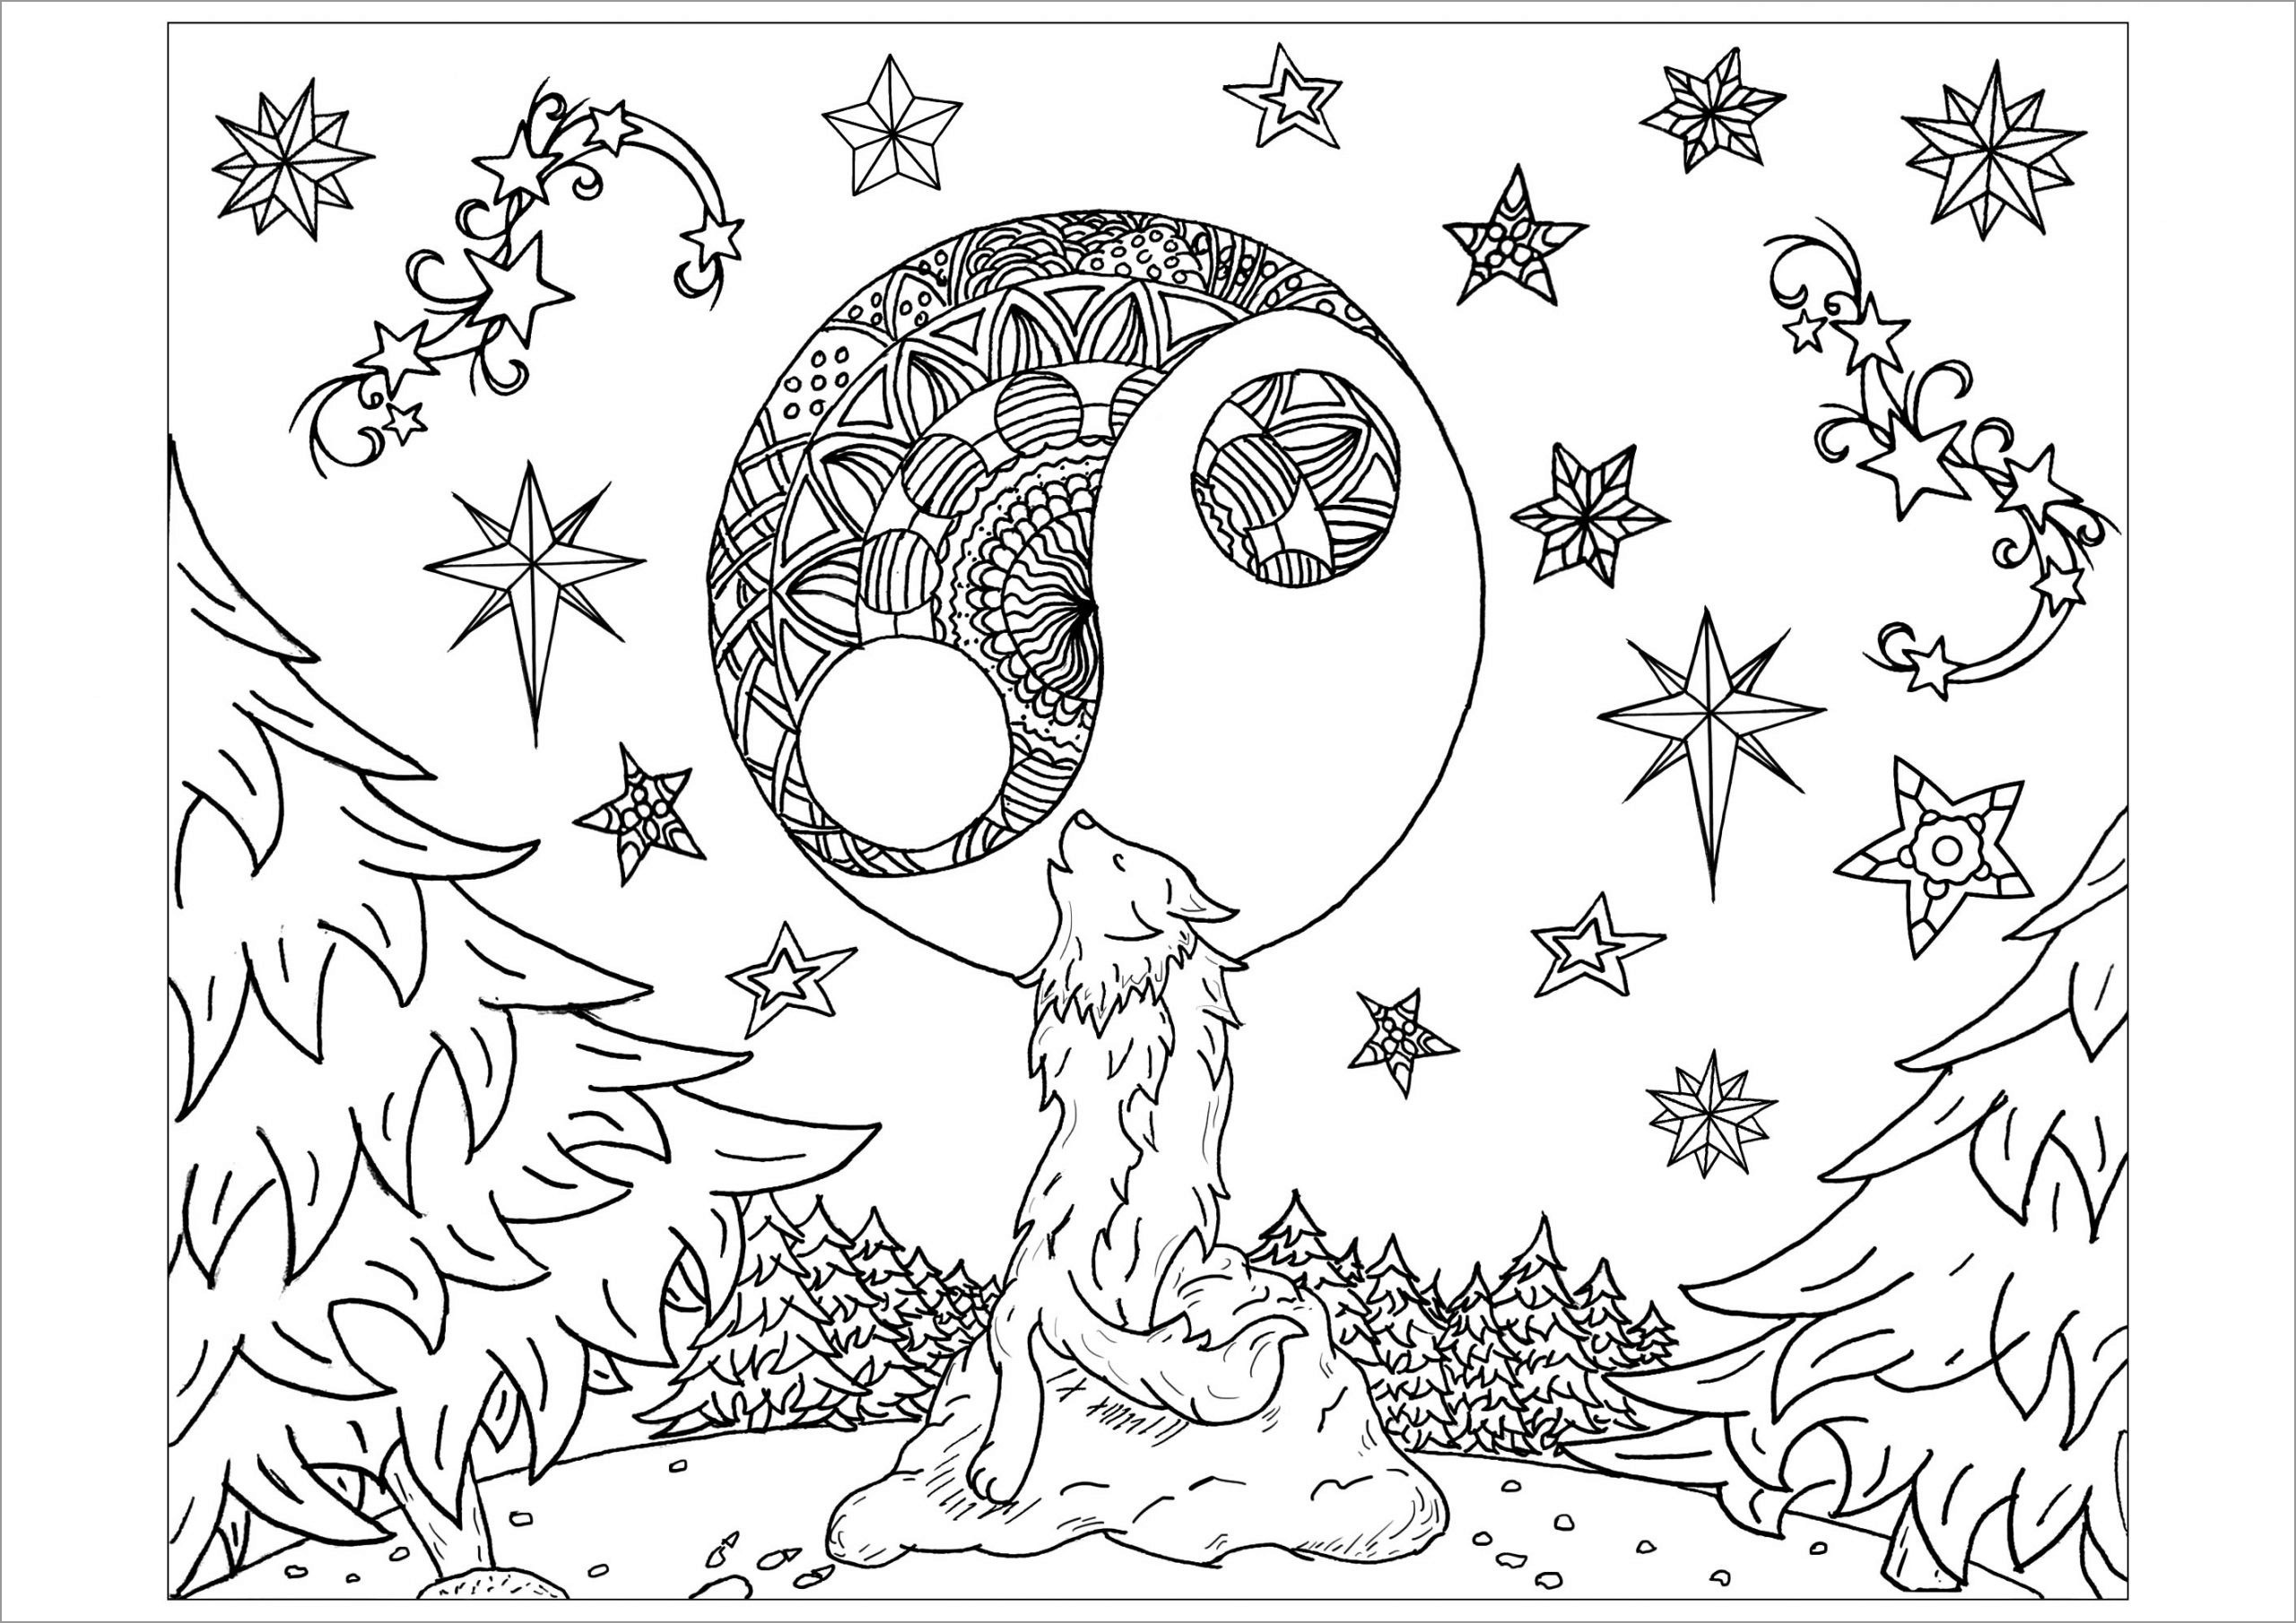 Wolf Mandala Night and Stars Coloring Page for Adult